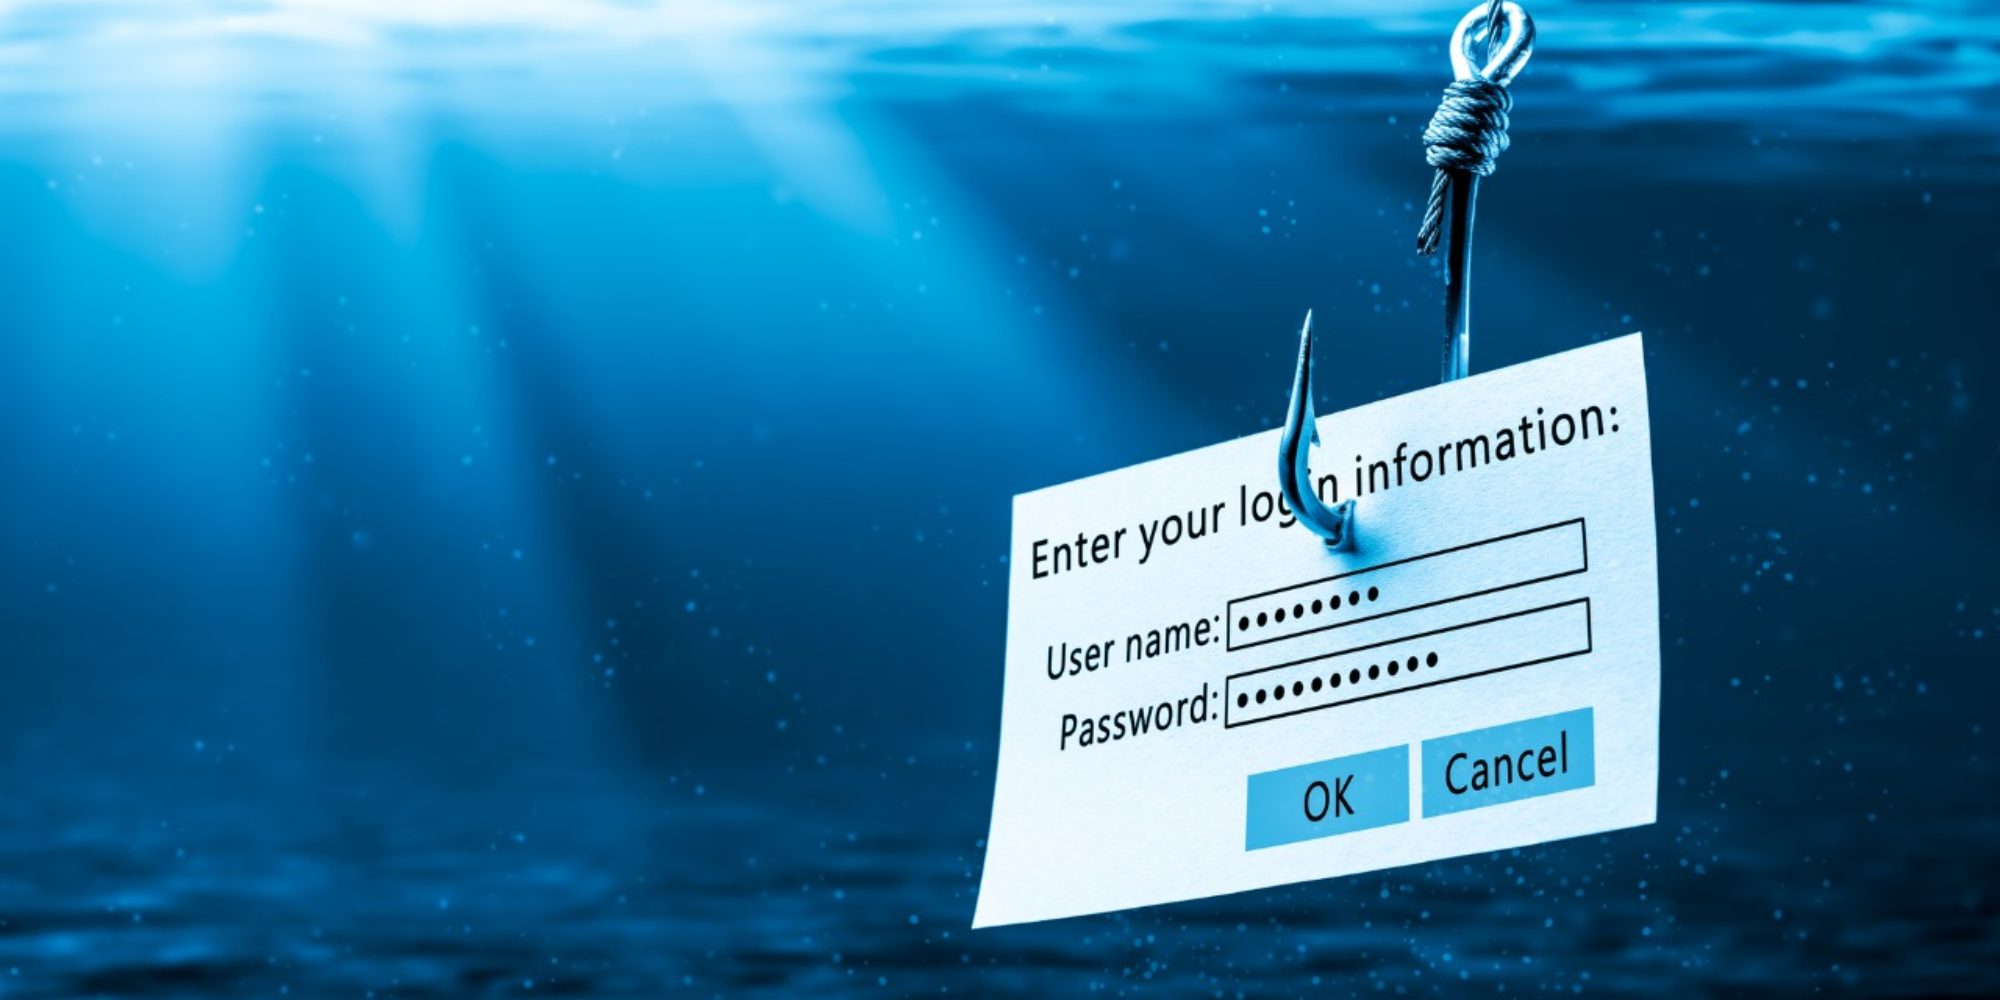 A Practical Guide to Identifying Phishing Emails